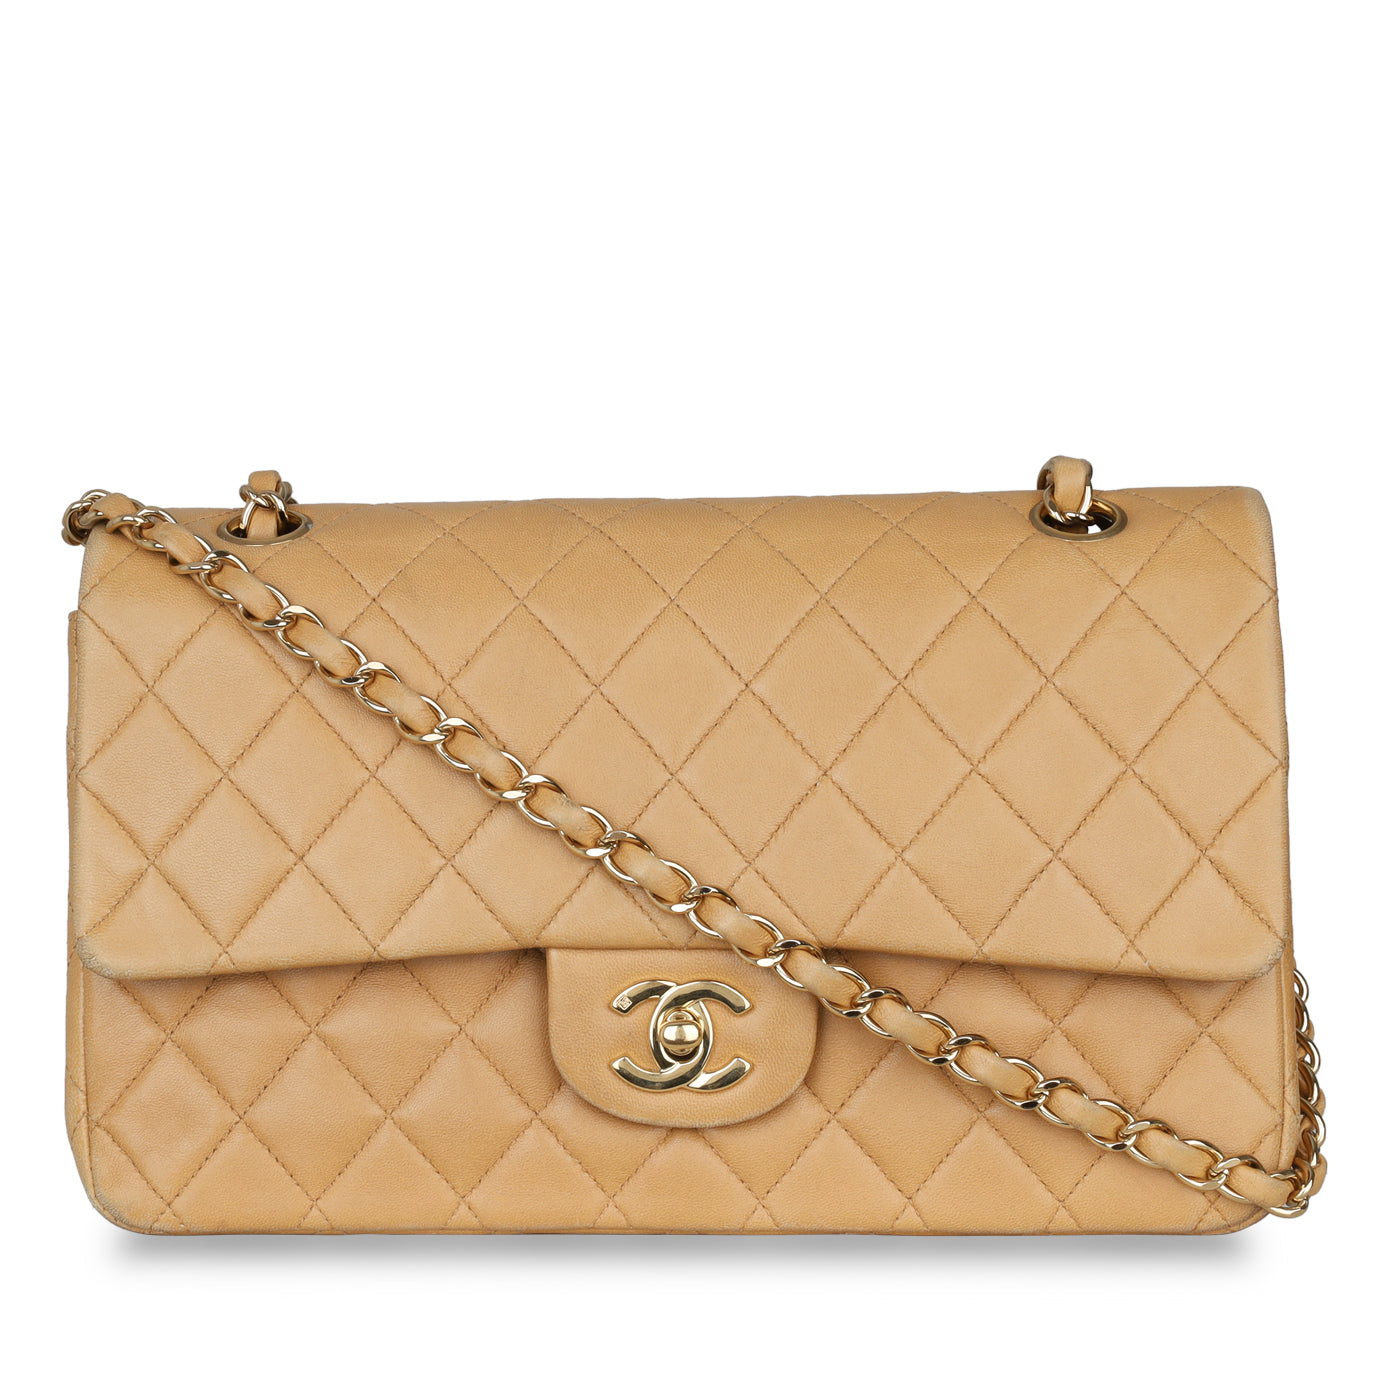 Chanel Fashion Therapy Small Flap Bag, Beige Caviar Leather, Brushed Gold  Hardware, New in Box